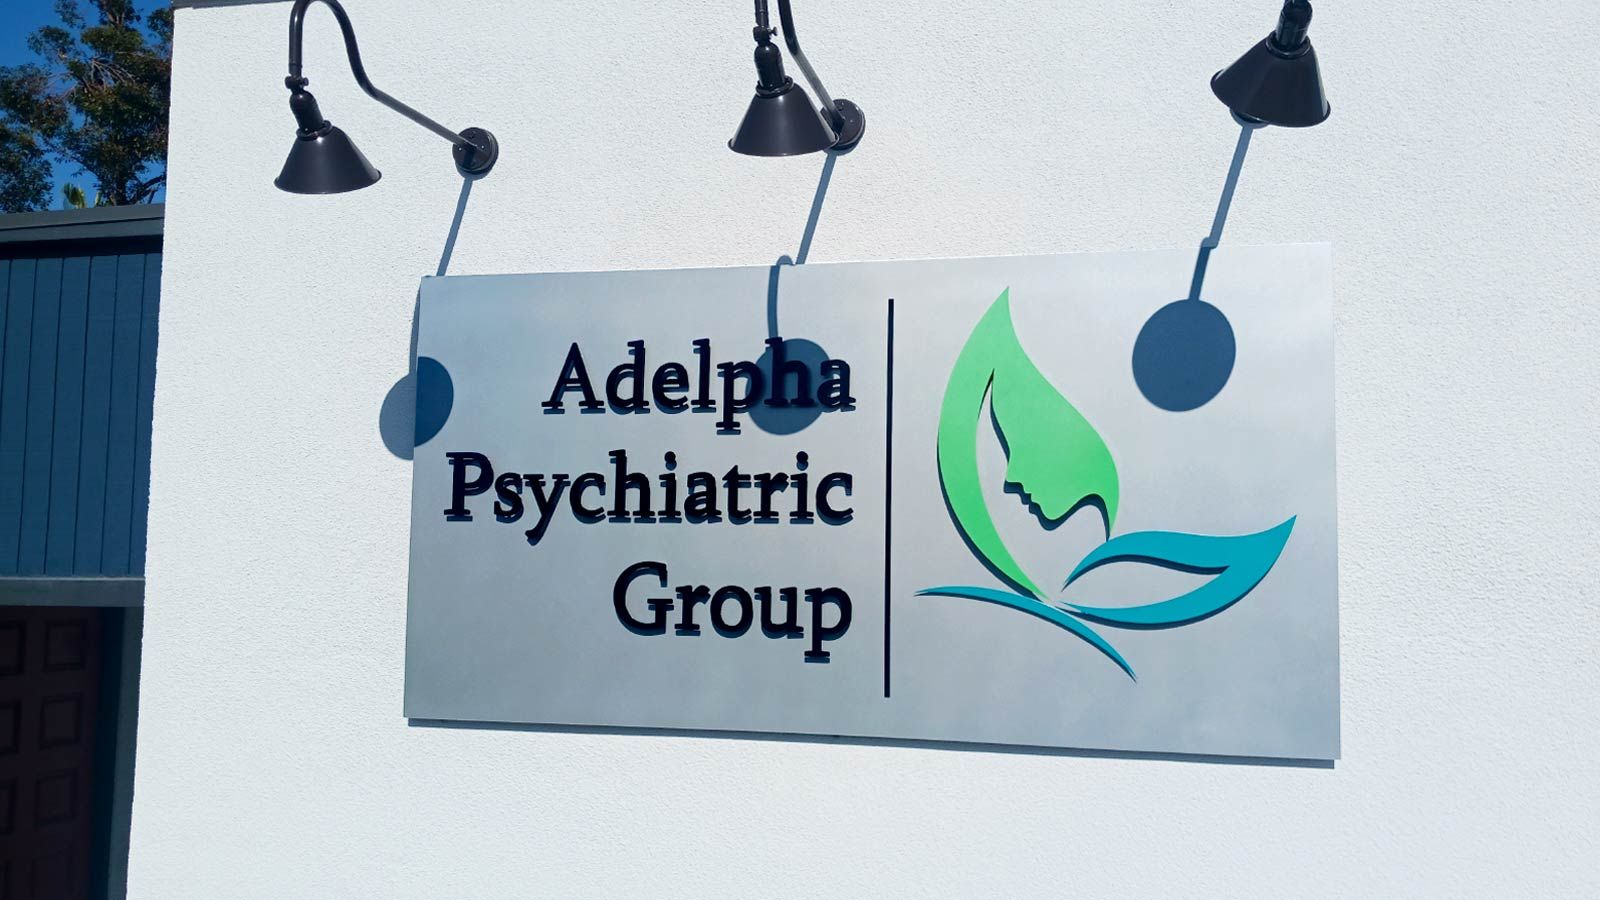 Adelpha Psychiatric Group building sign installation